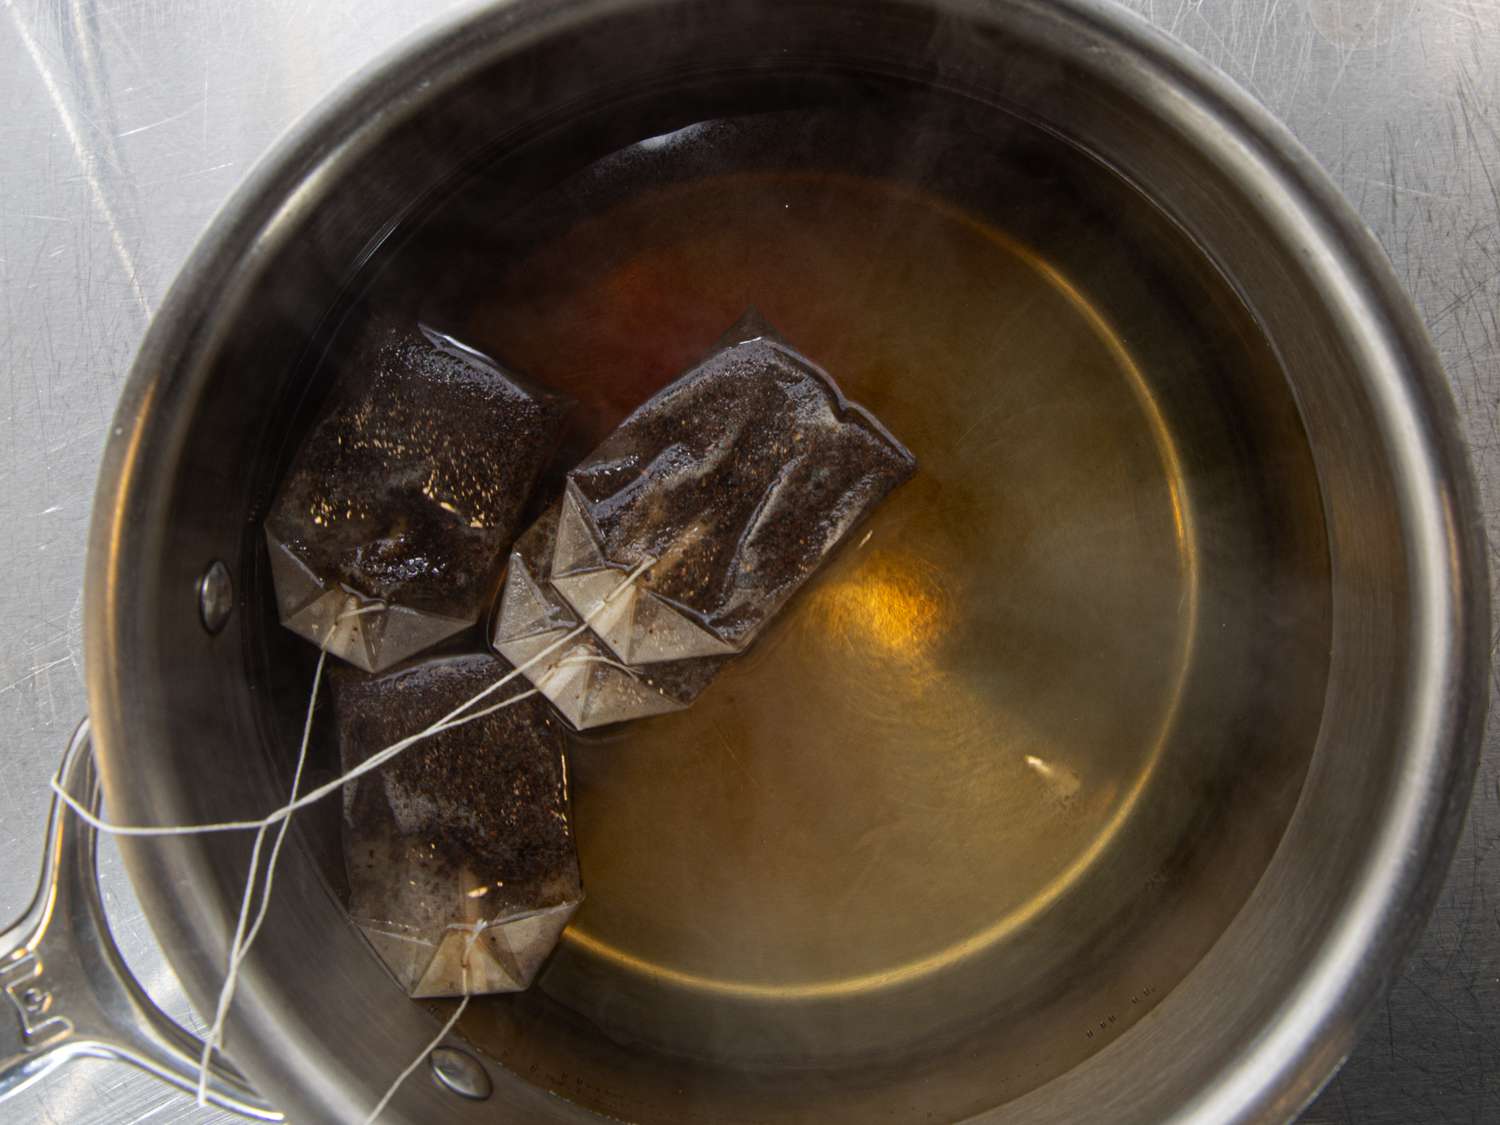 Overhead view of tea brewing in a pot